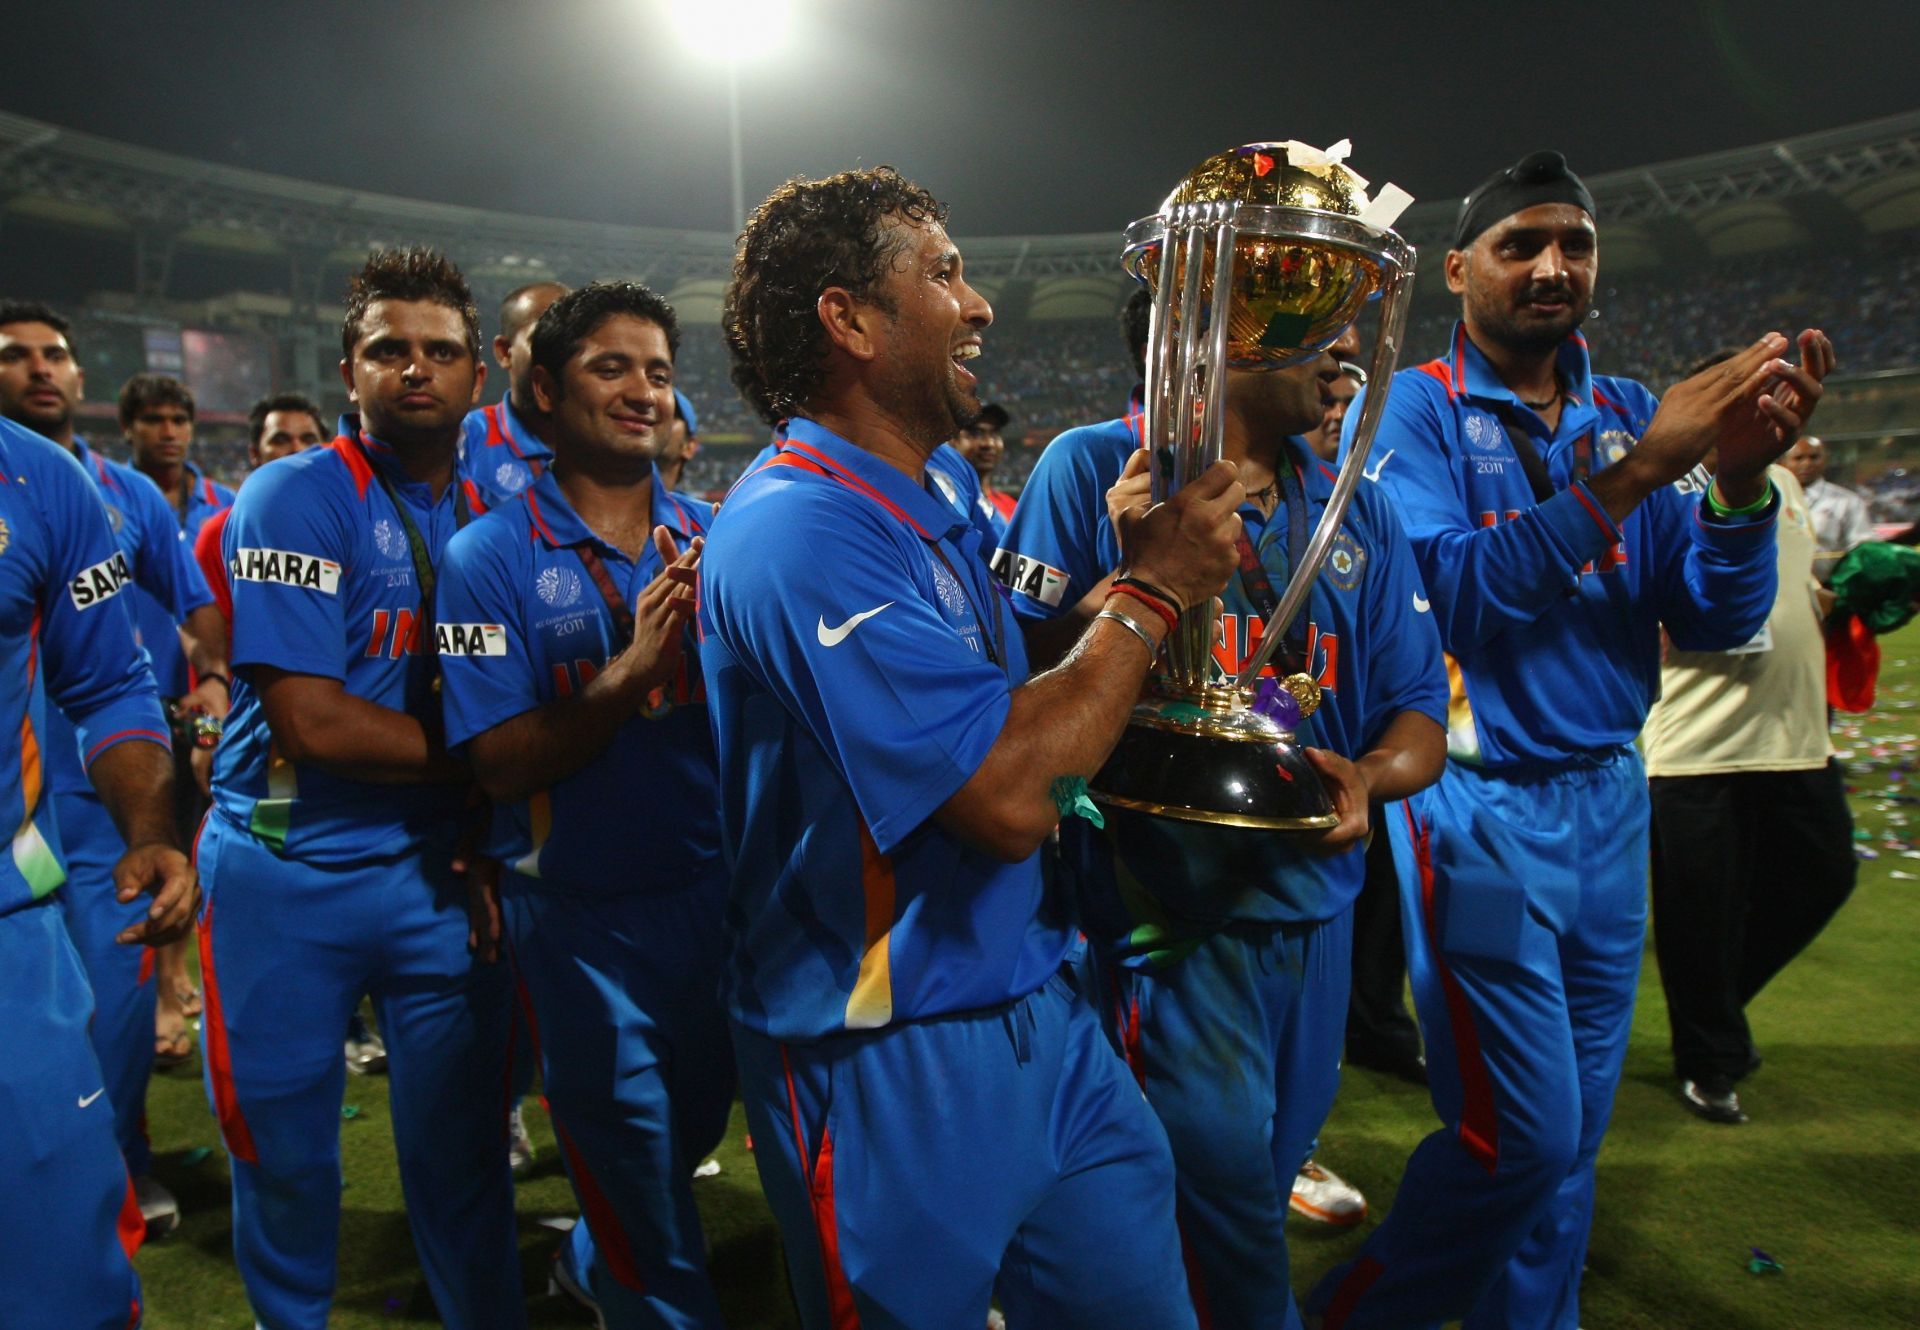 The BCCI is likely to receive the hosting rights for the 2031 Cricket World Cup